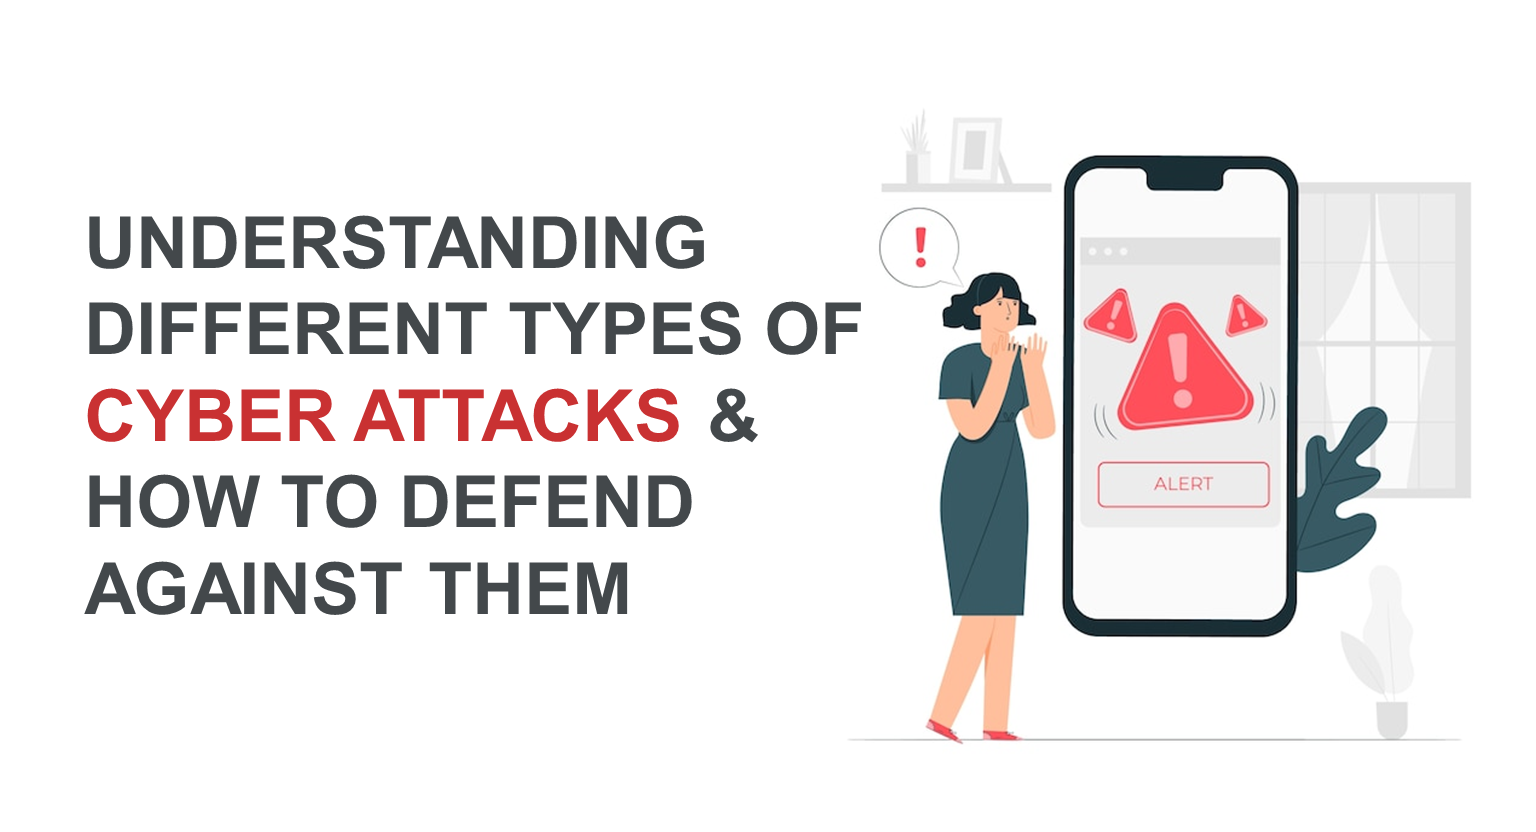 Understanding Different Types of Cyber Attacks and How to Defend Against Them